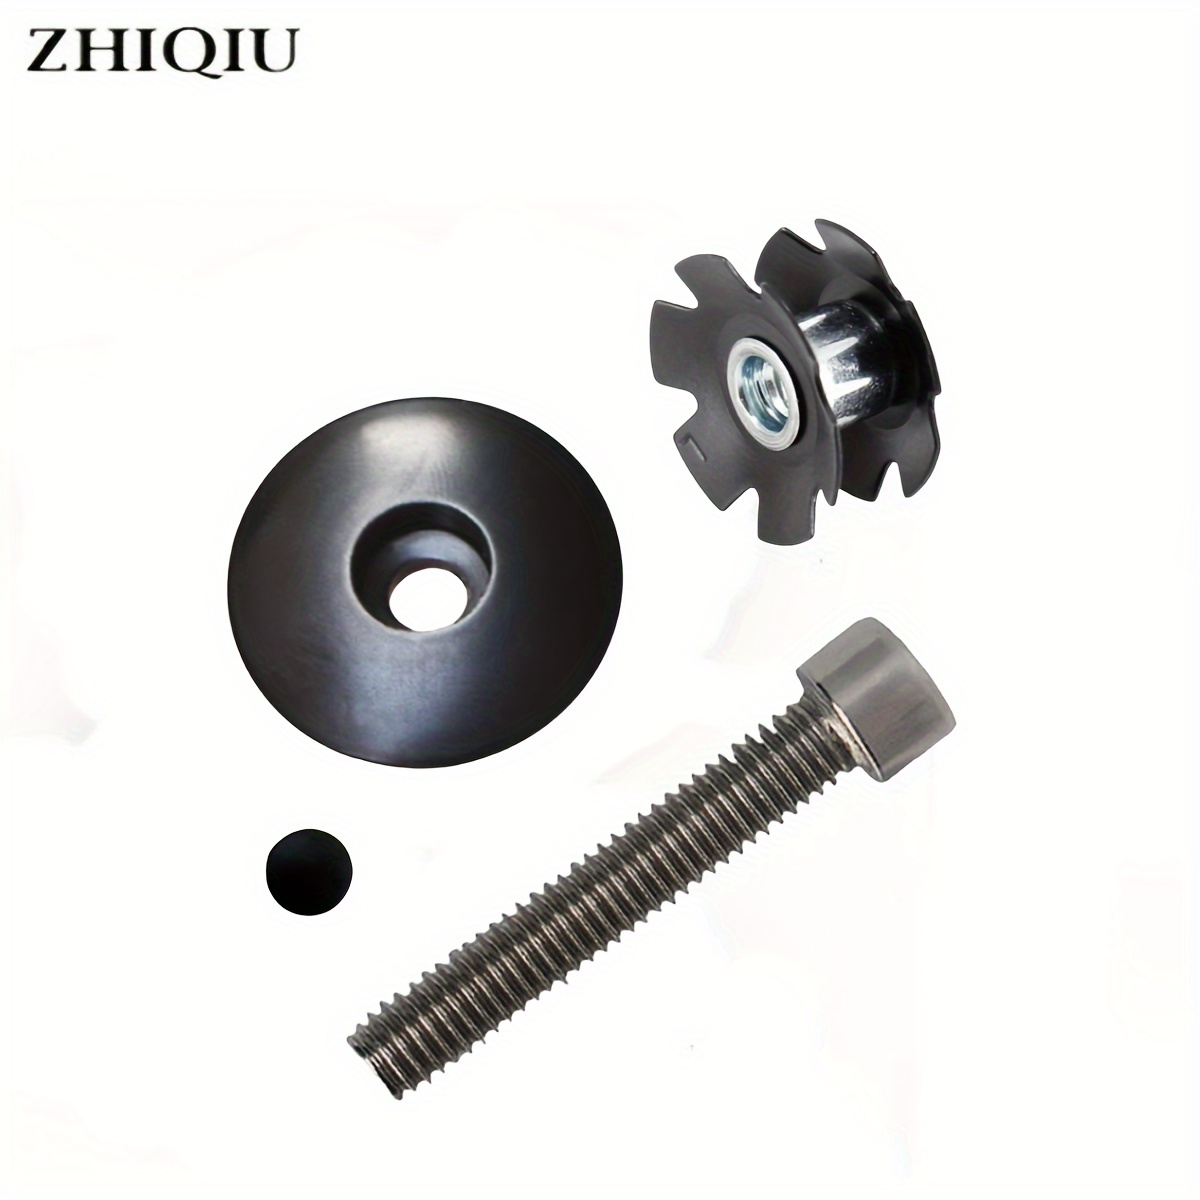 

Zhiqu Bike Headset Stem Top Cap Cover With Screw, Headset Star Nut And Dust Cap, Fit For 1-1/8 Inch